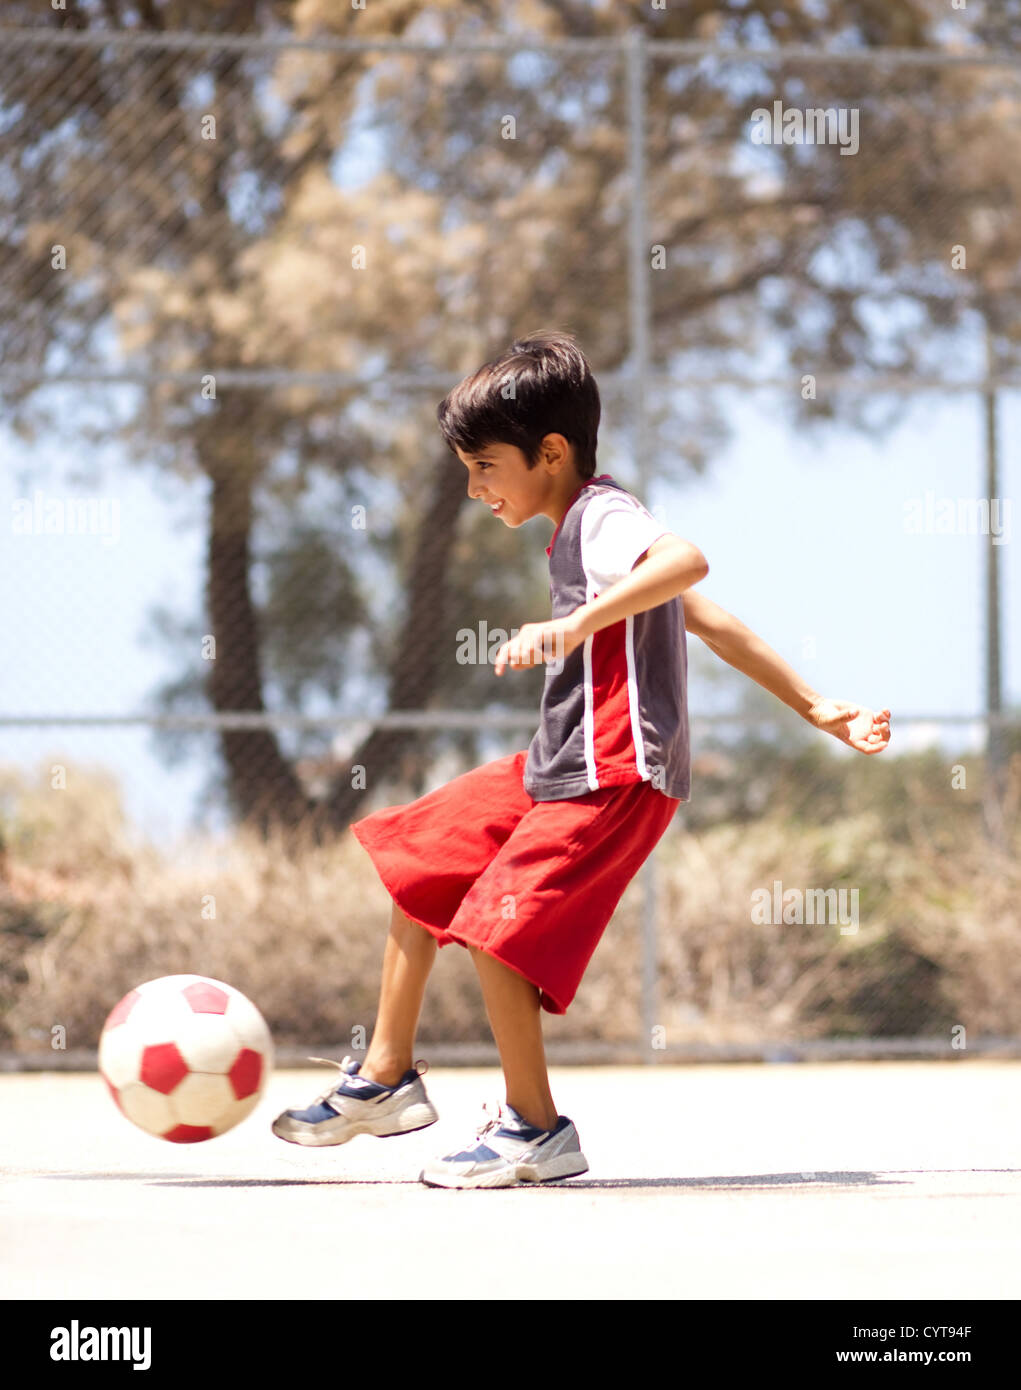 Young kid in action enjoying soccer, outdoors Stock Photo